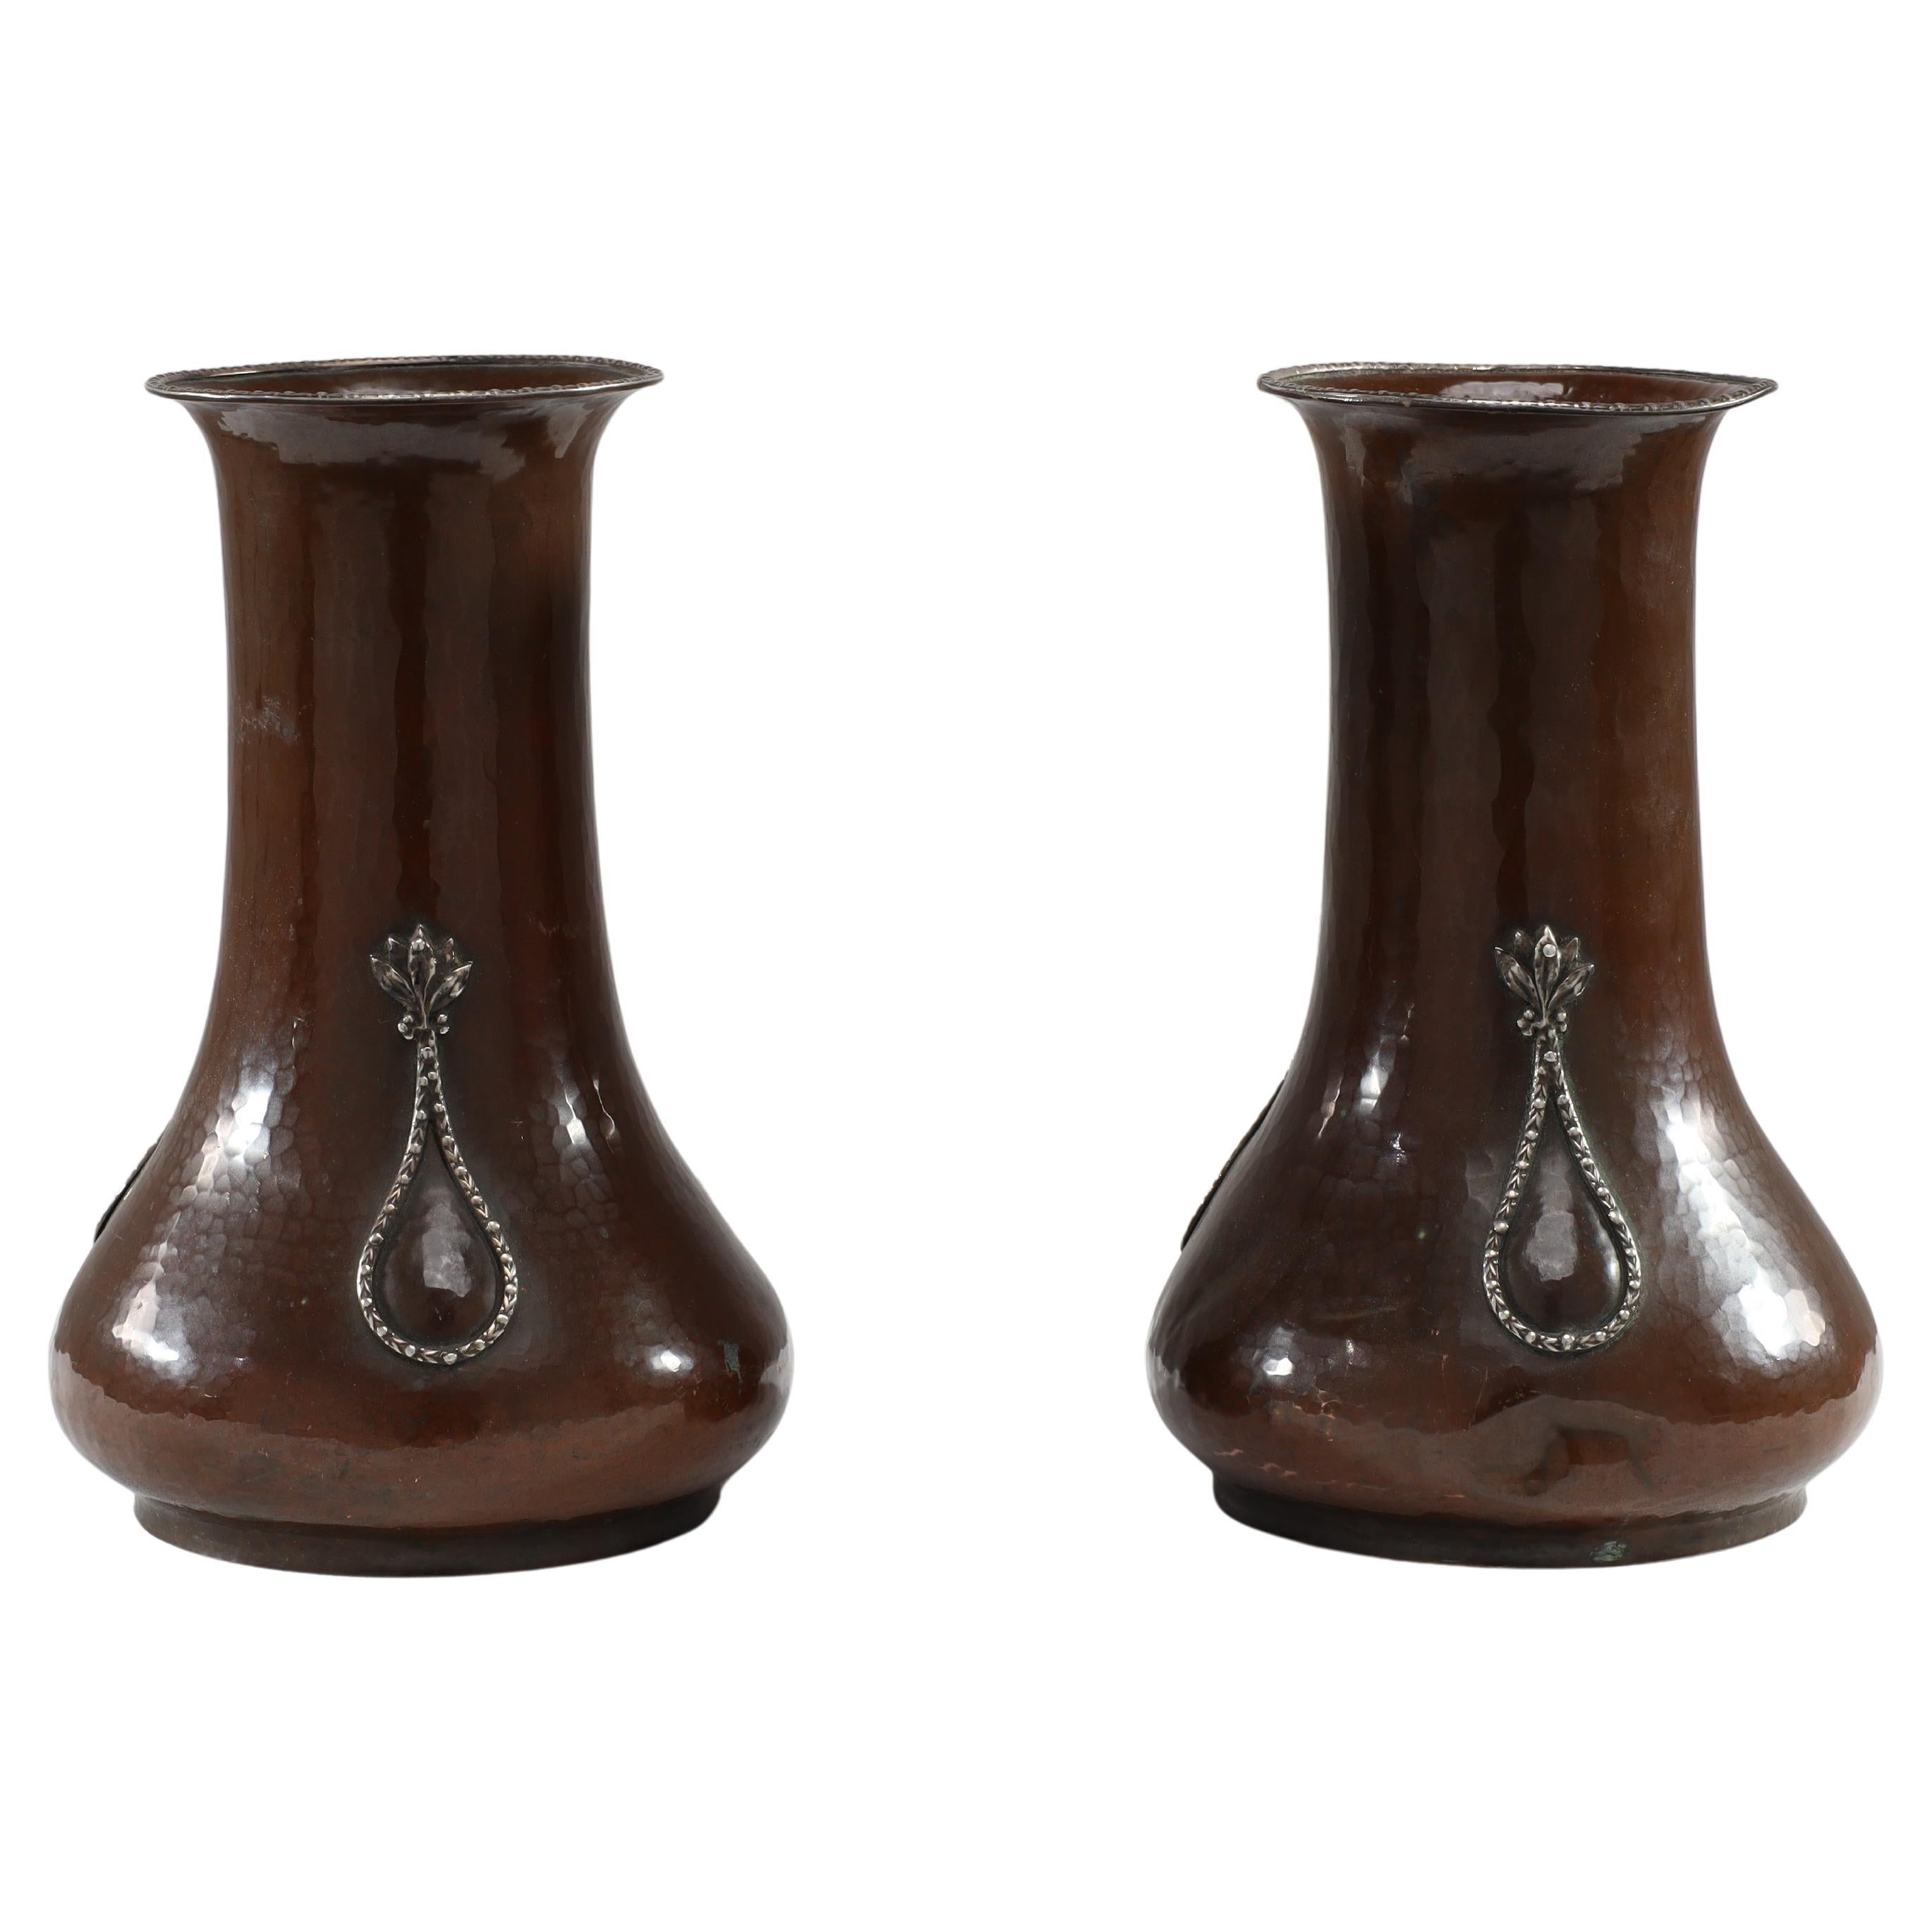 A E Jones. A pair of hand-hammered copper vases with silver teardrop decoration